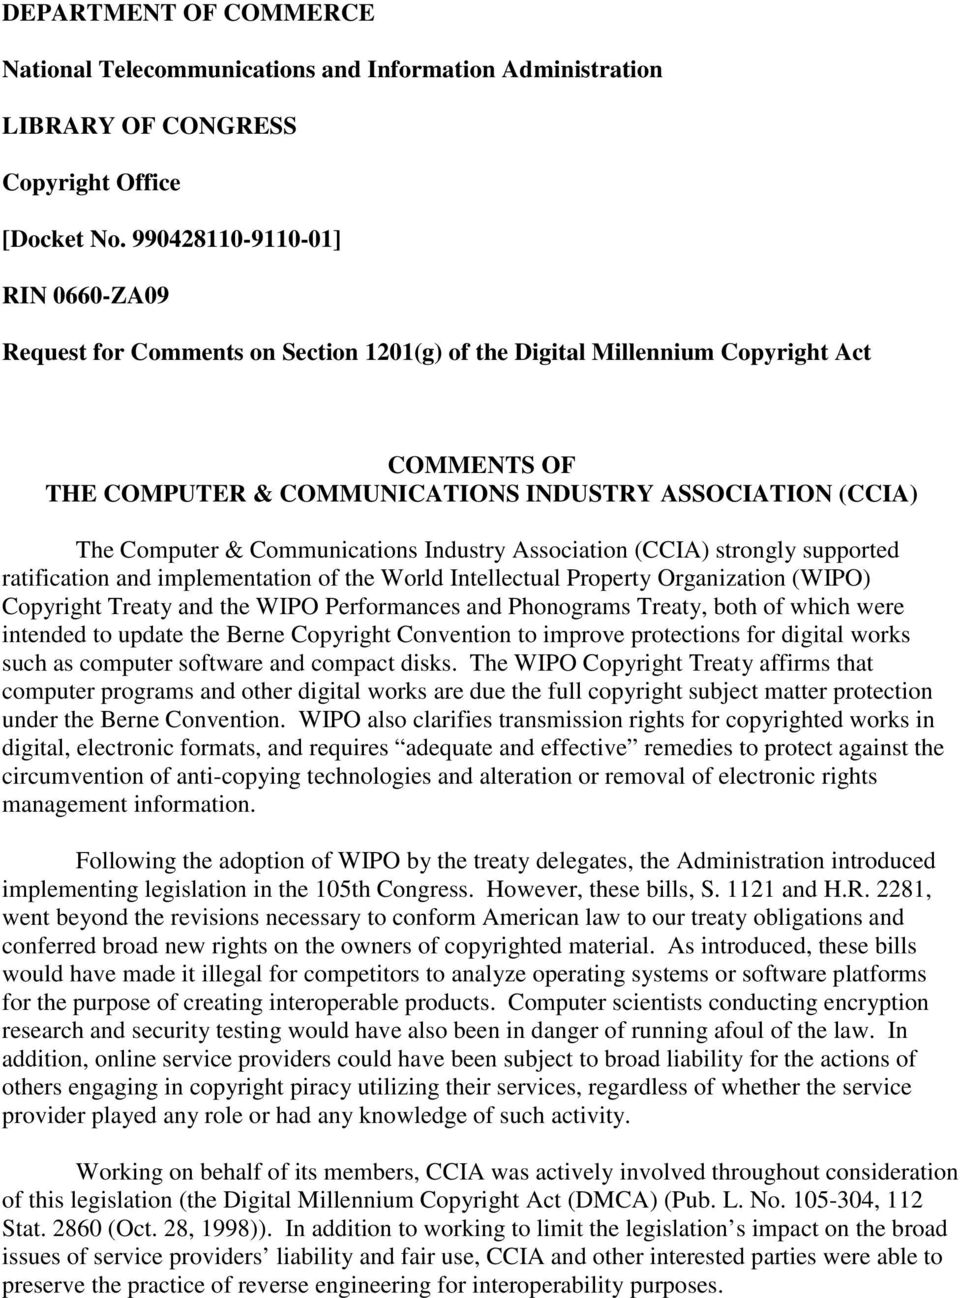 Communications Industry Association (CCIA) strongly supported ratification and implementation of the World Intellectual Property Organization (WIPO) Copyright Treaty and the WIPO Performances and